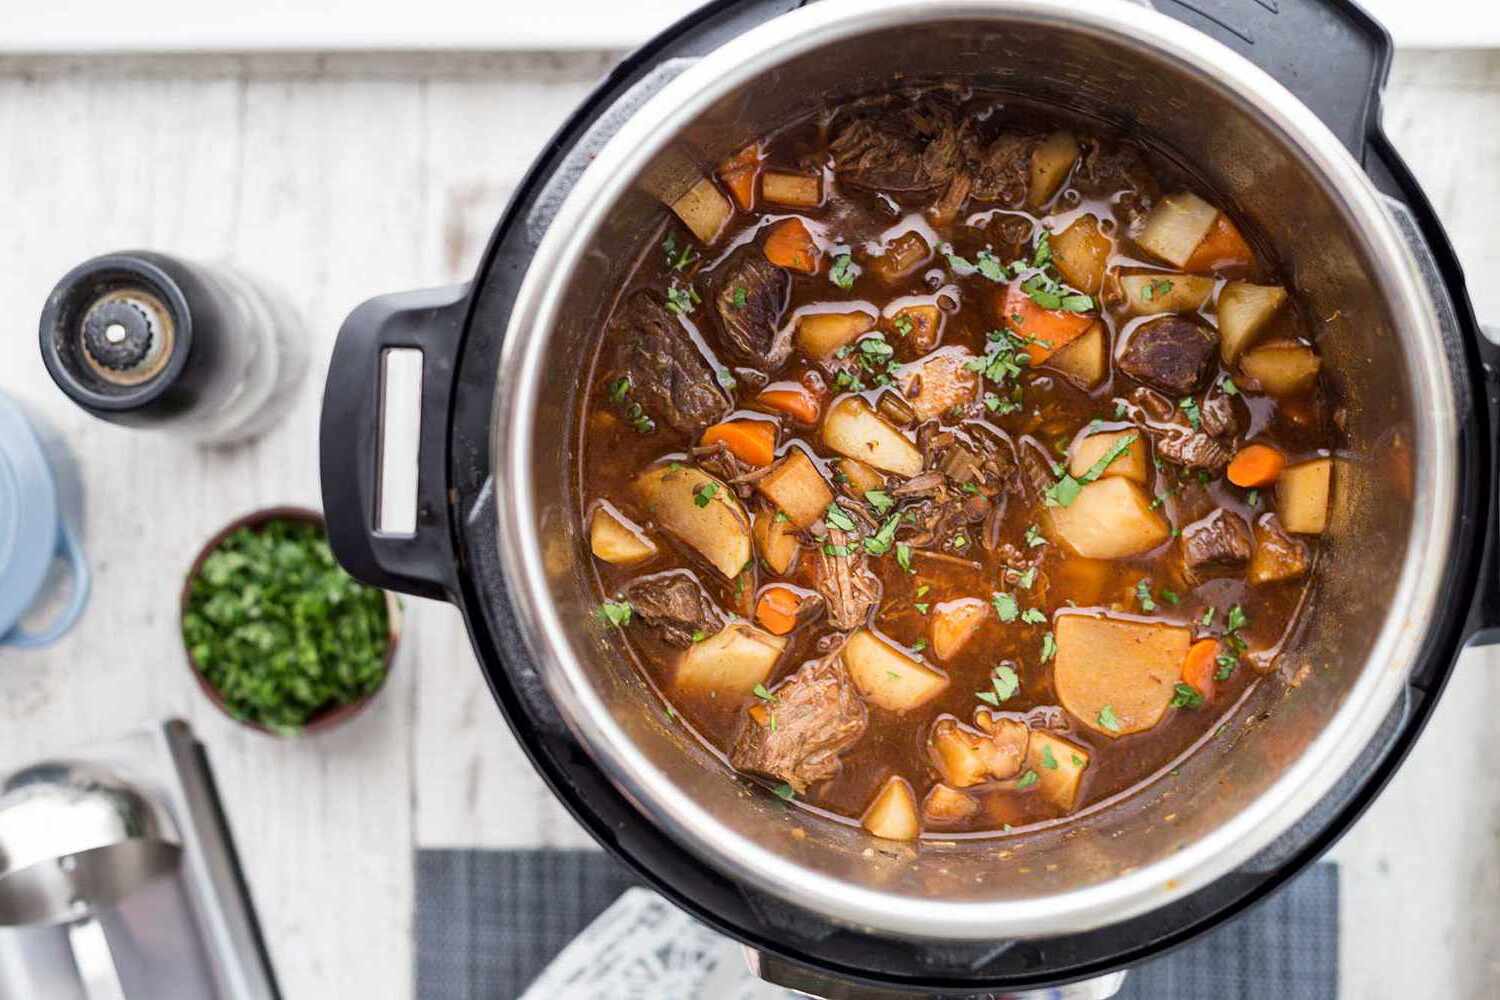 How to Make Guinness Beef Stew in the Pressure Cooker